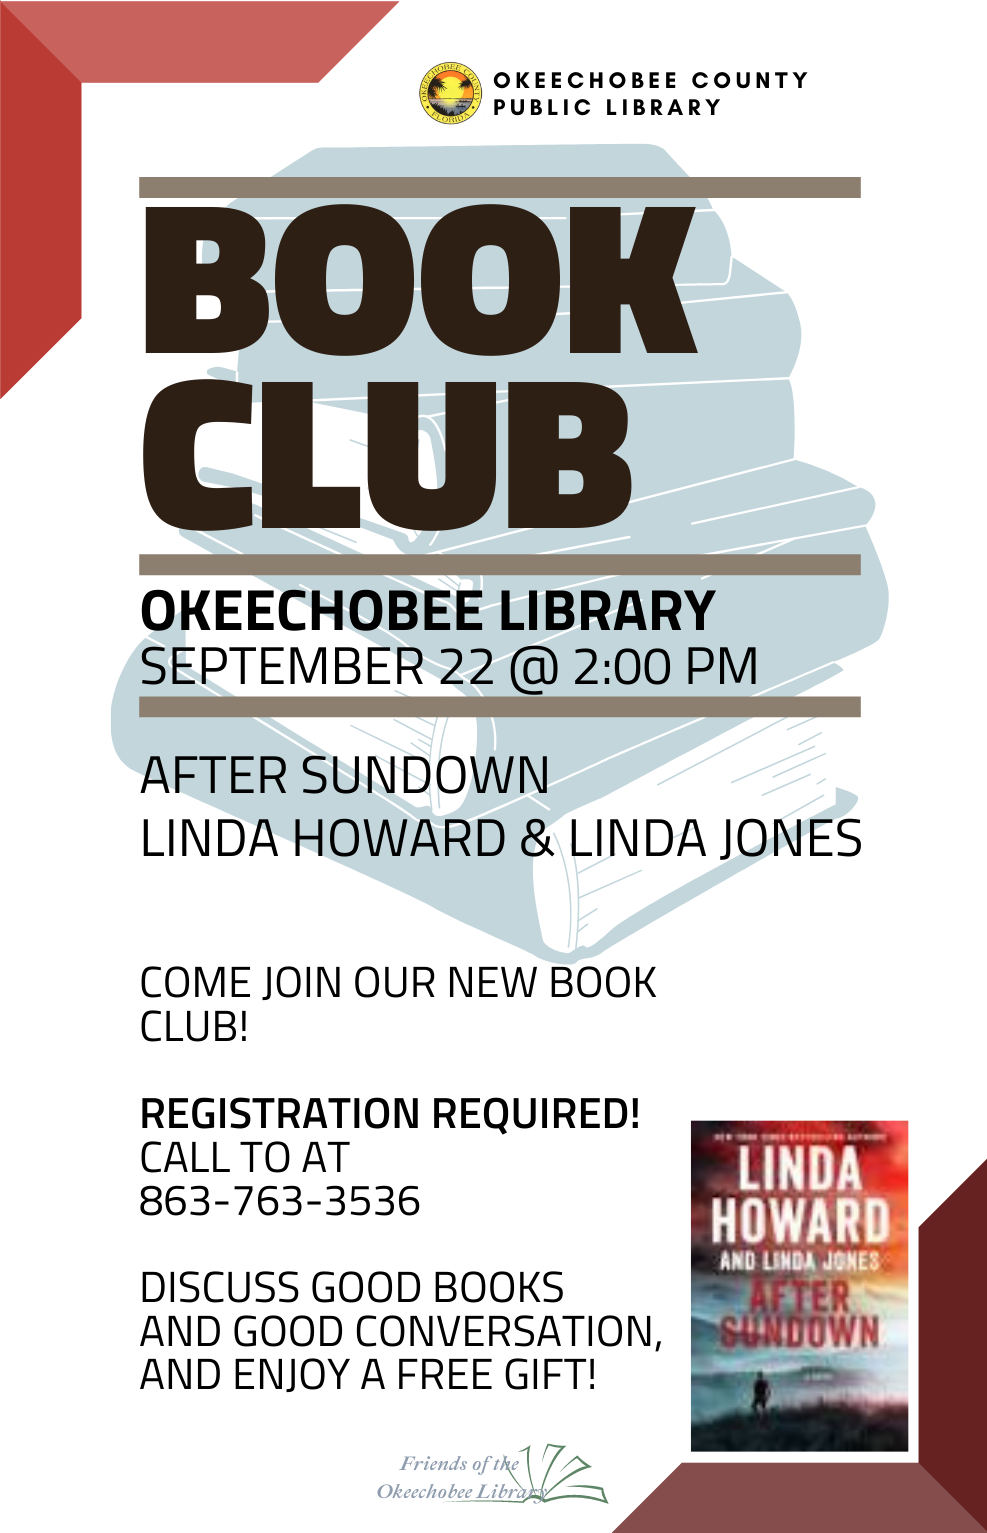 Okeechobee Library Book Club will meet September 22nd at 2:00 p.m. to discuss After Sundown by Linda Howard. Join us to discuss our latest read and receive a small gift bag!